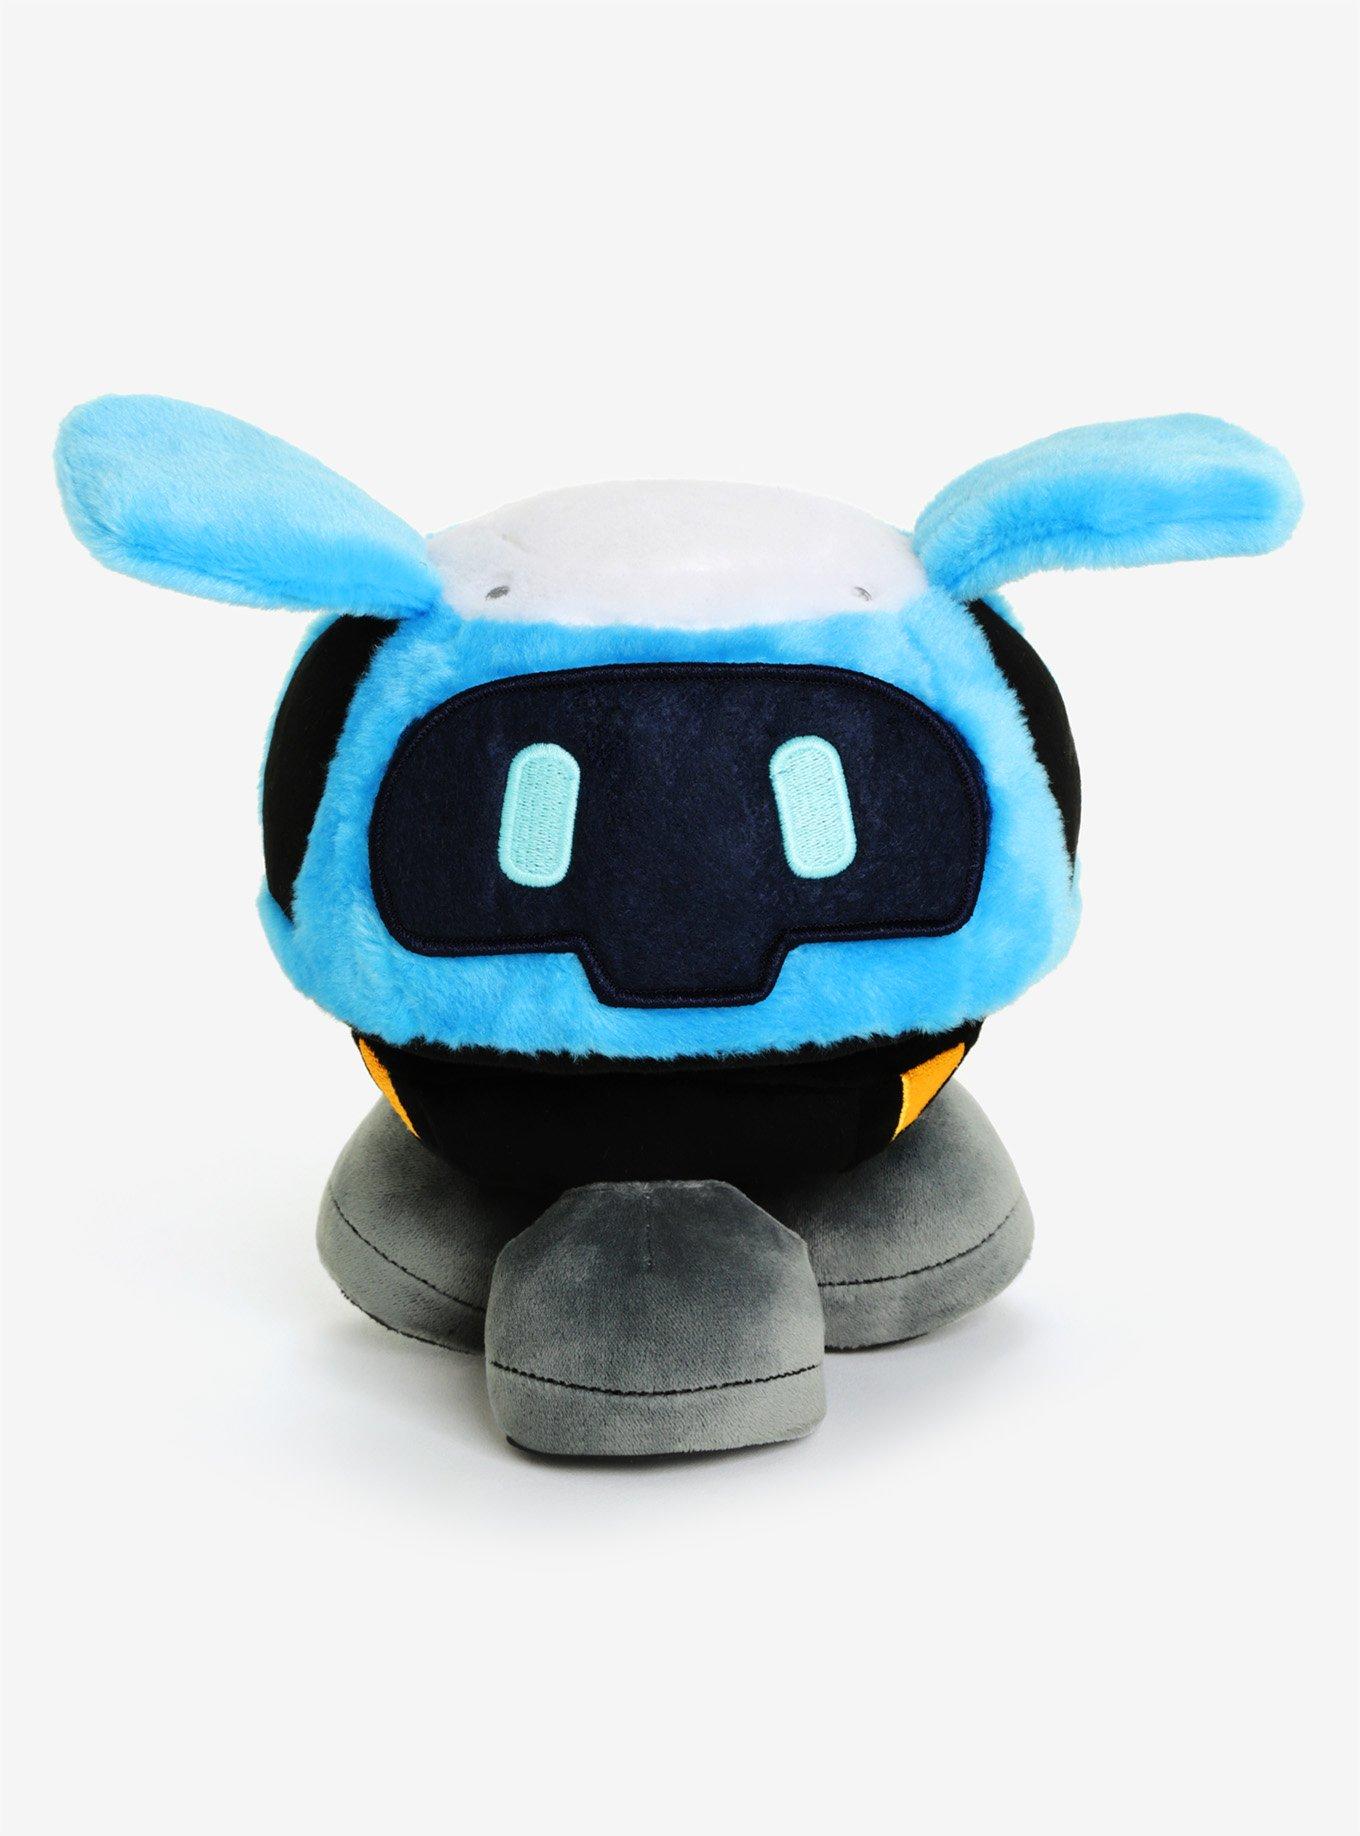 Top 10 Overwatch Plushies